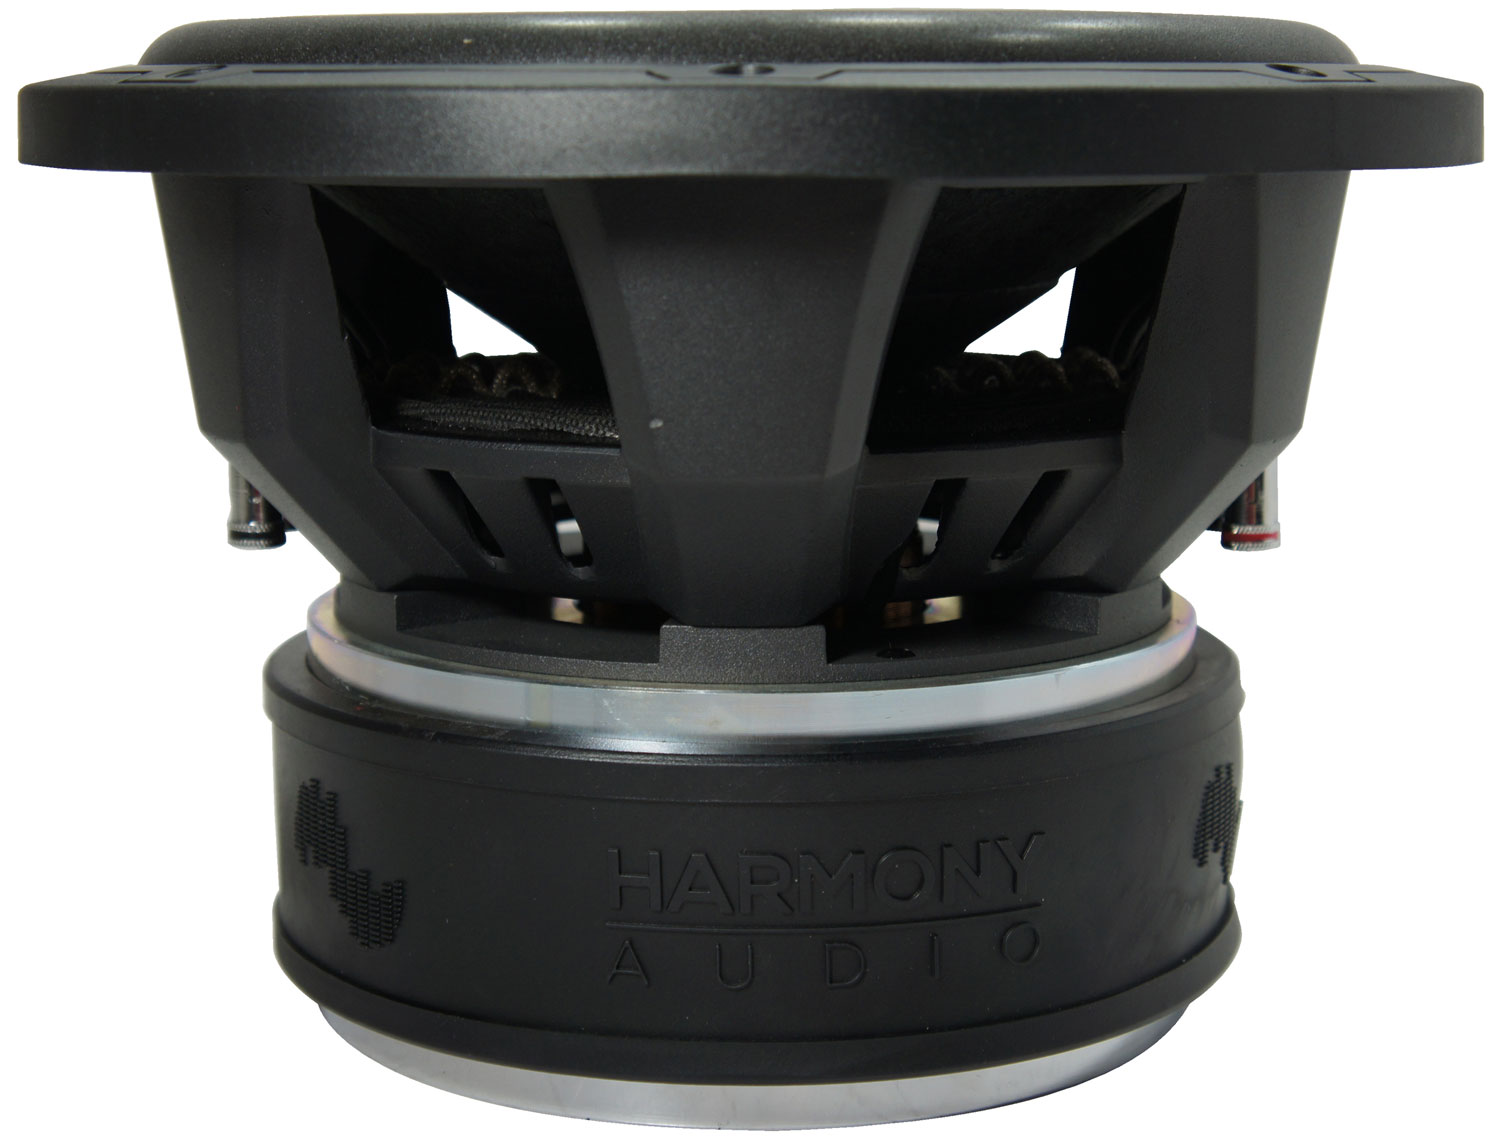 Harmony Audio HA-C102 Car Stereo Competition 10" Sub 2000W Dual 2 Ohm Subwoofer - image 5 of 7